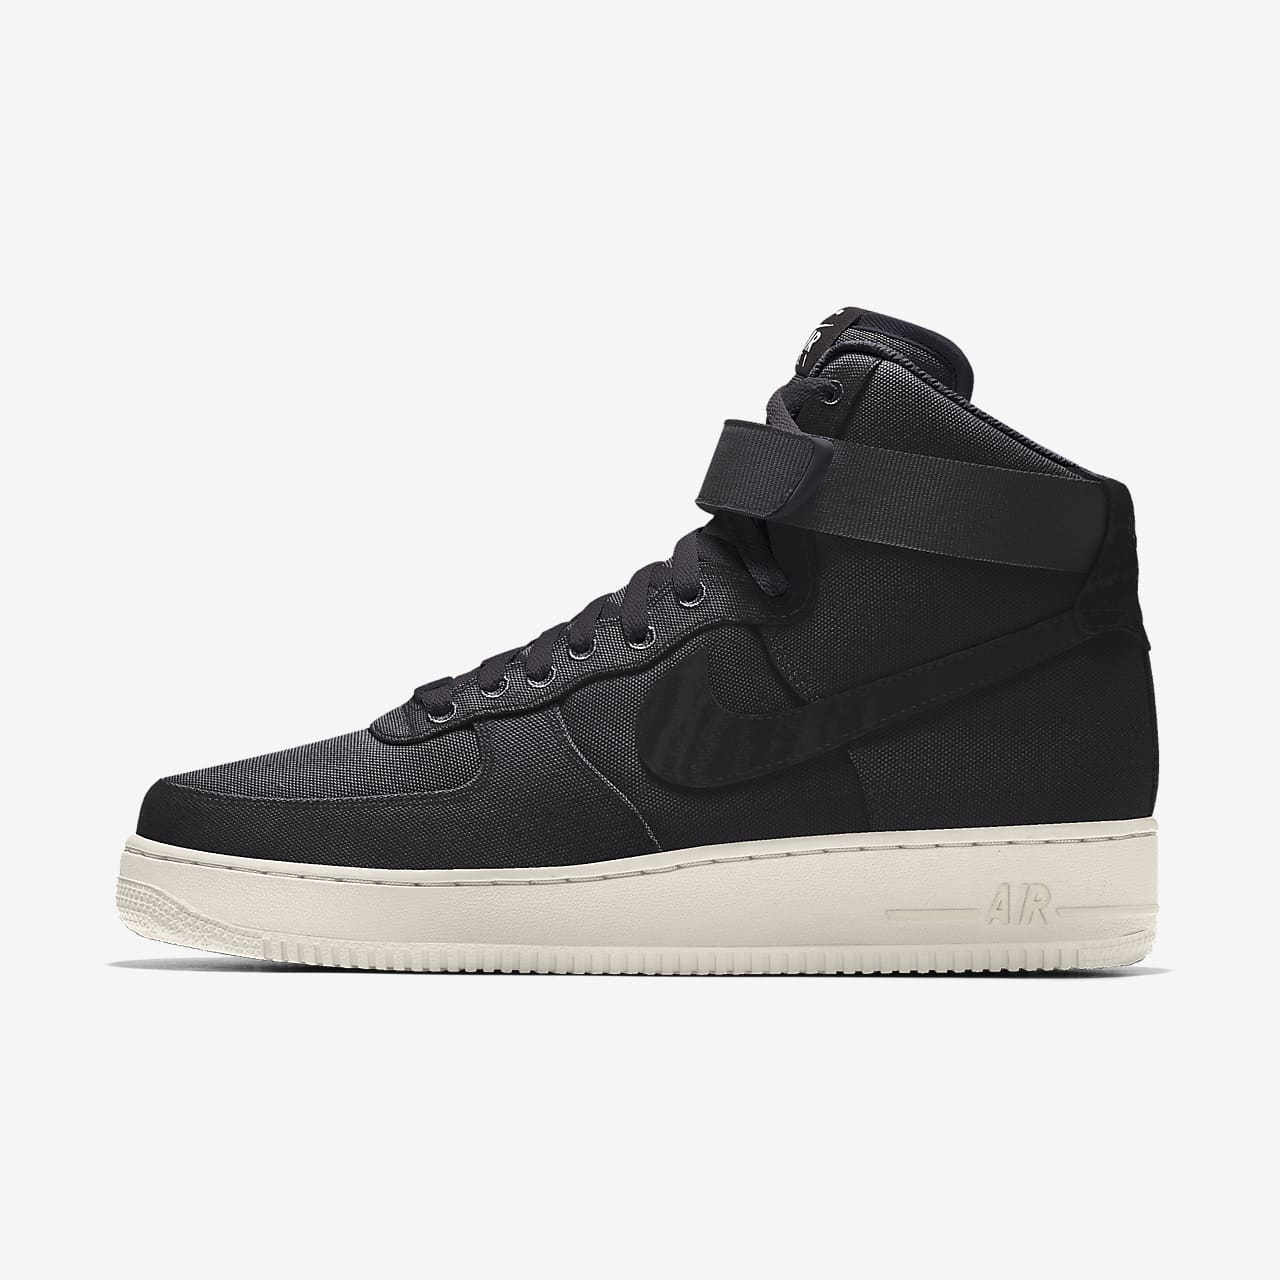 Cerco solo Ostentoso Nike Air Force 1 High By You Zapatillas personalizadas - Mujer. Nike ES